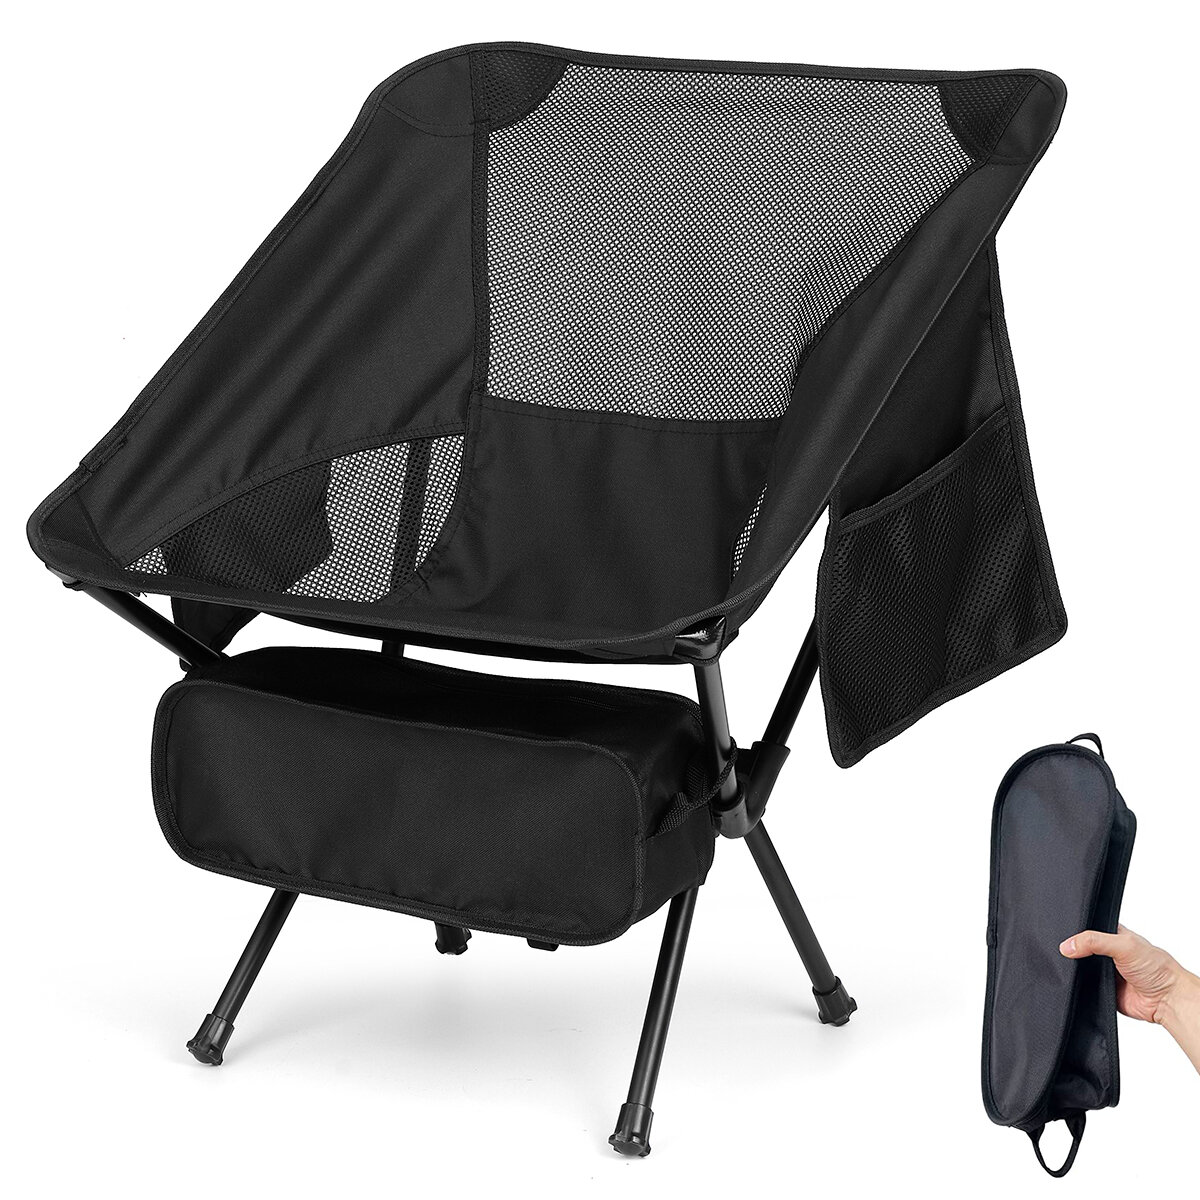 Image of Outdoor Camping Chair Portable Folding Chair Beach Hiking Picnic Seat Fishing Tools Chair with 2 Storage Bags